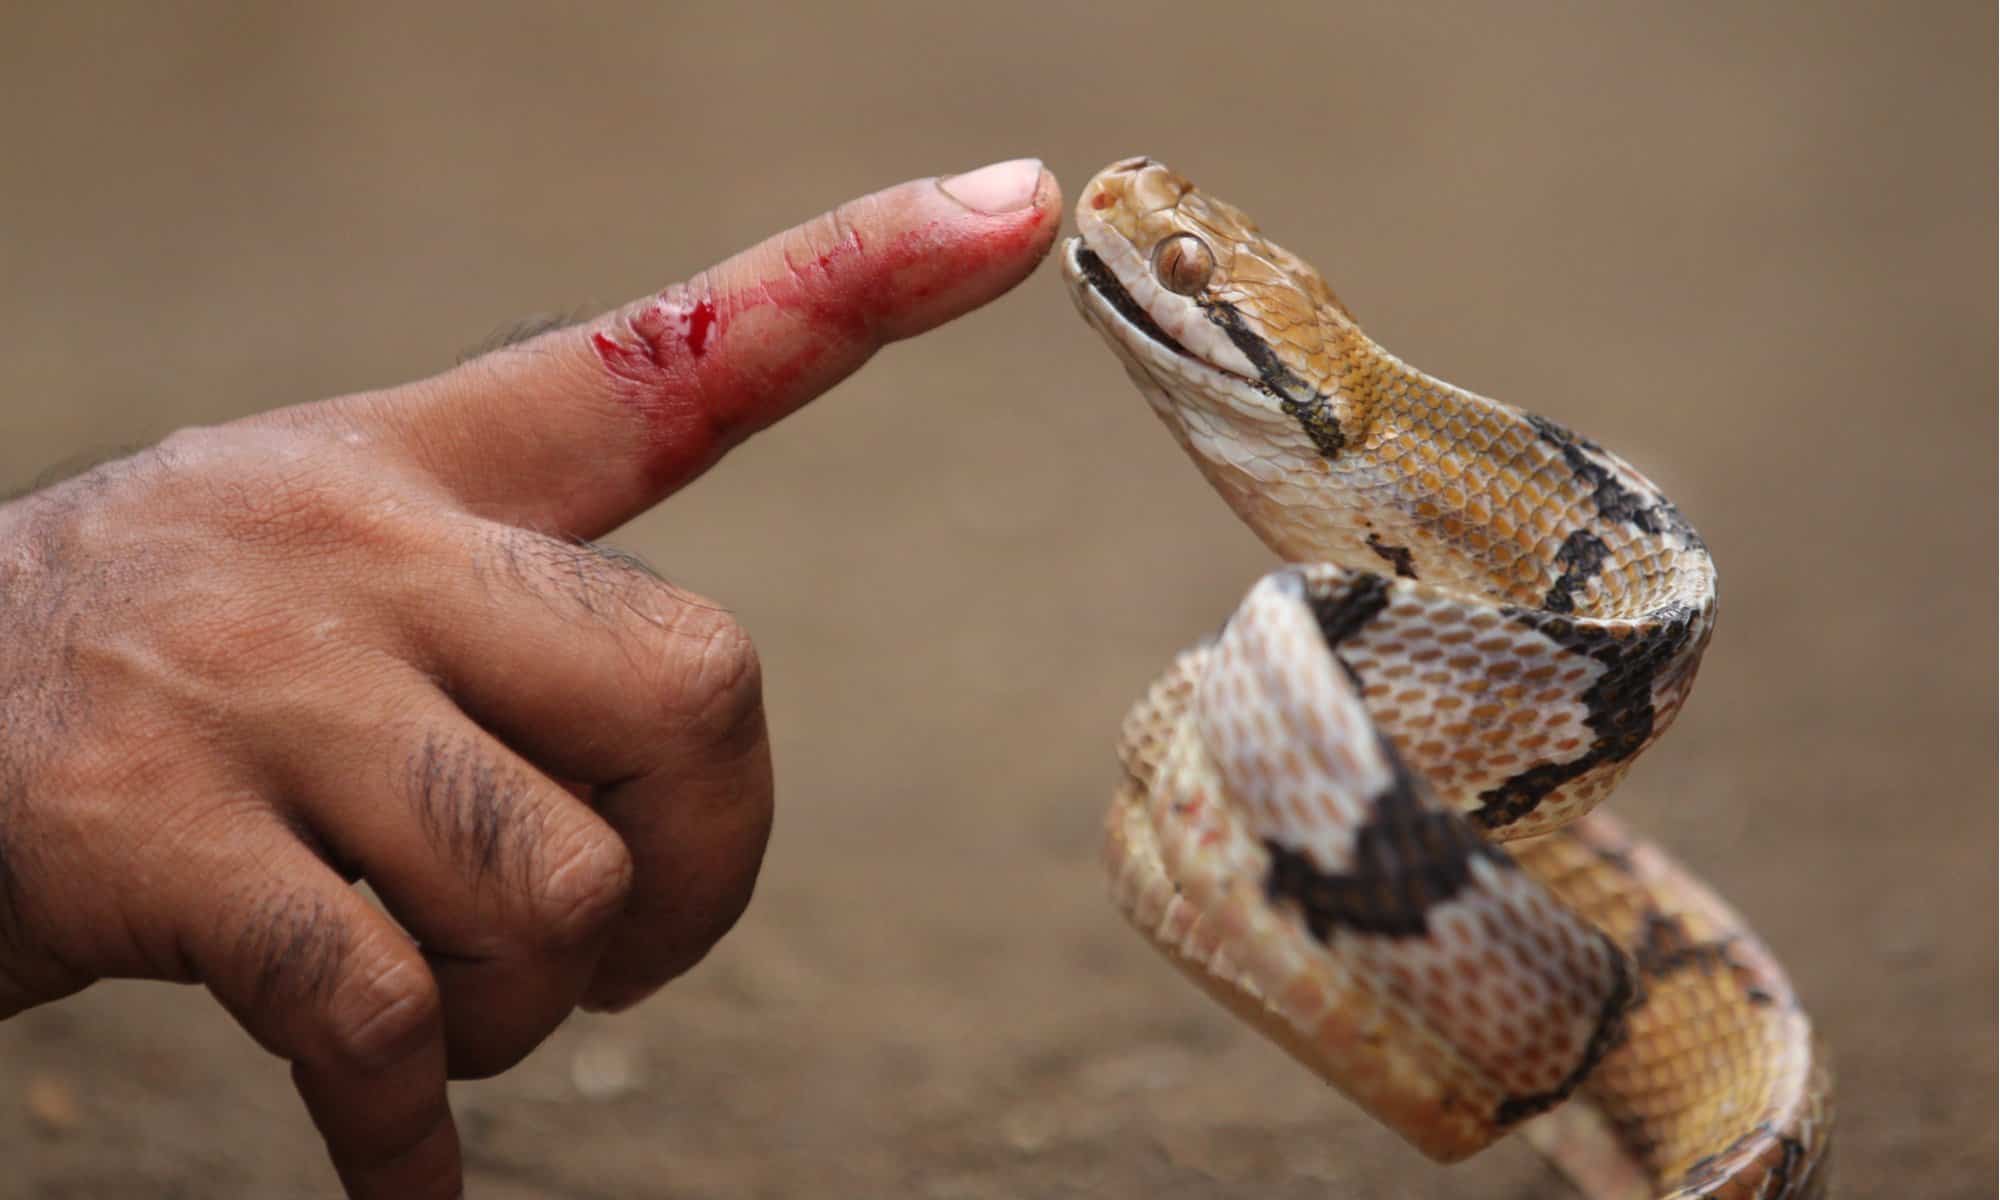 Russells Viper Bite Why It Has Enough Venom To Kill 22 Humans And How